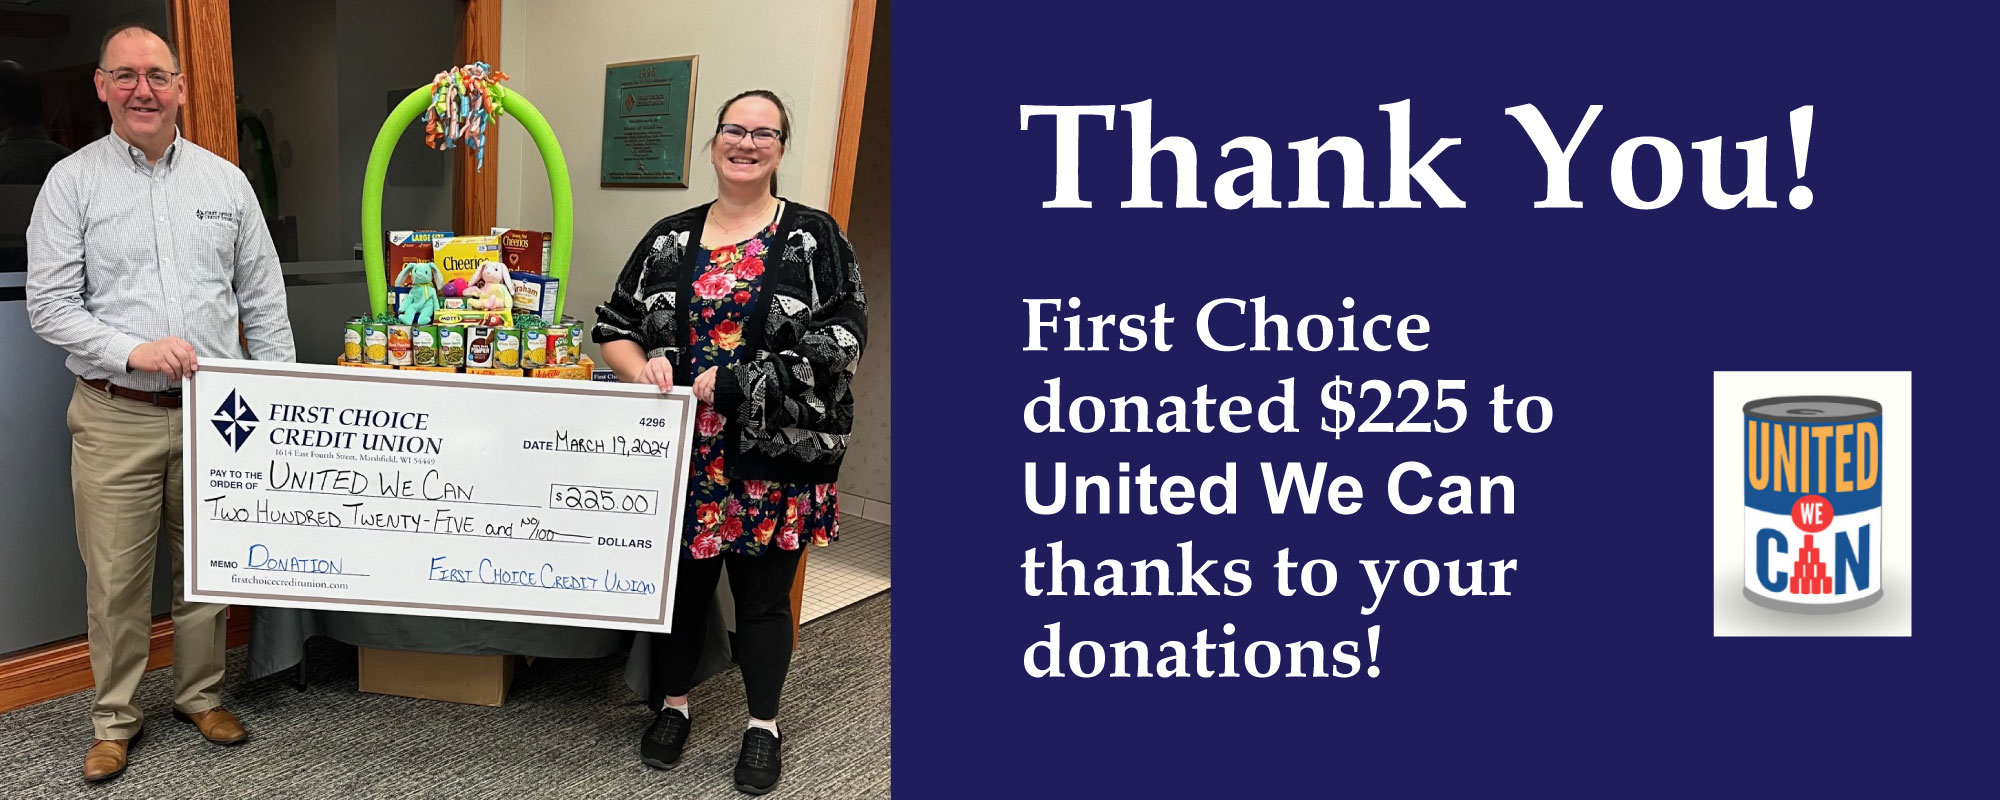 Thank you for your donations to United We Can! We were able to donate $225 plus your food donations!